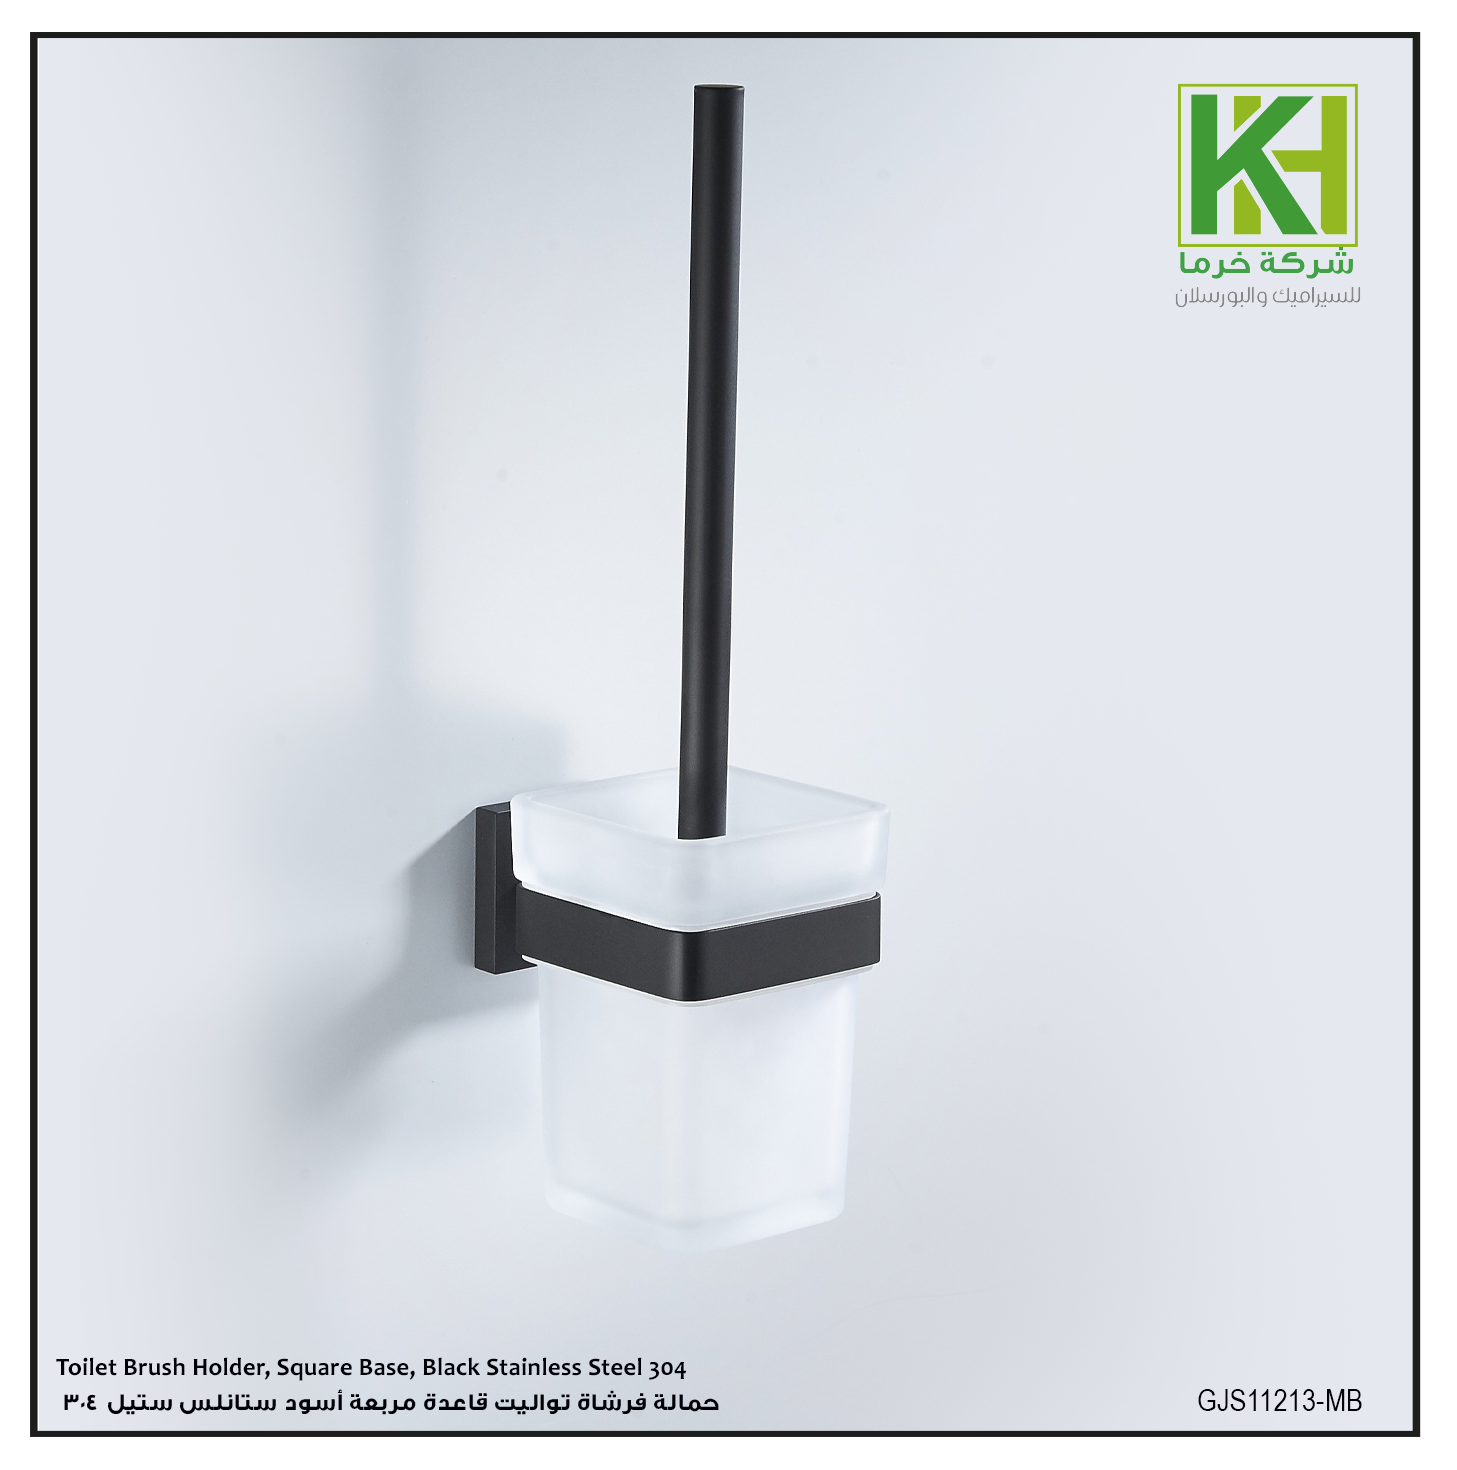 Picture of Toilet Brush Holder, Square Base, Black Stainless Steel 304